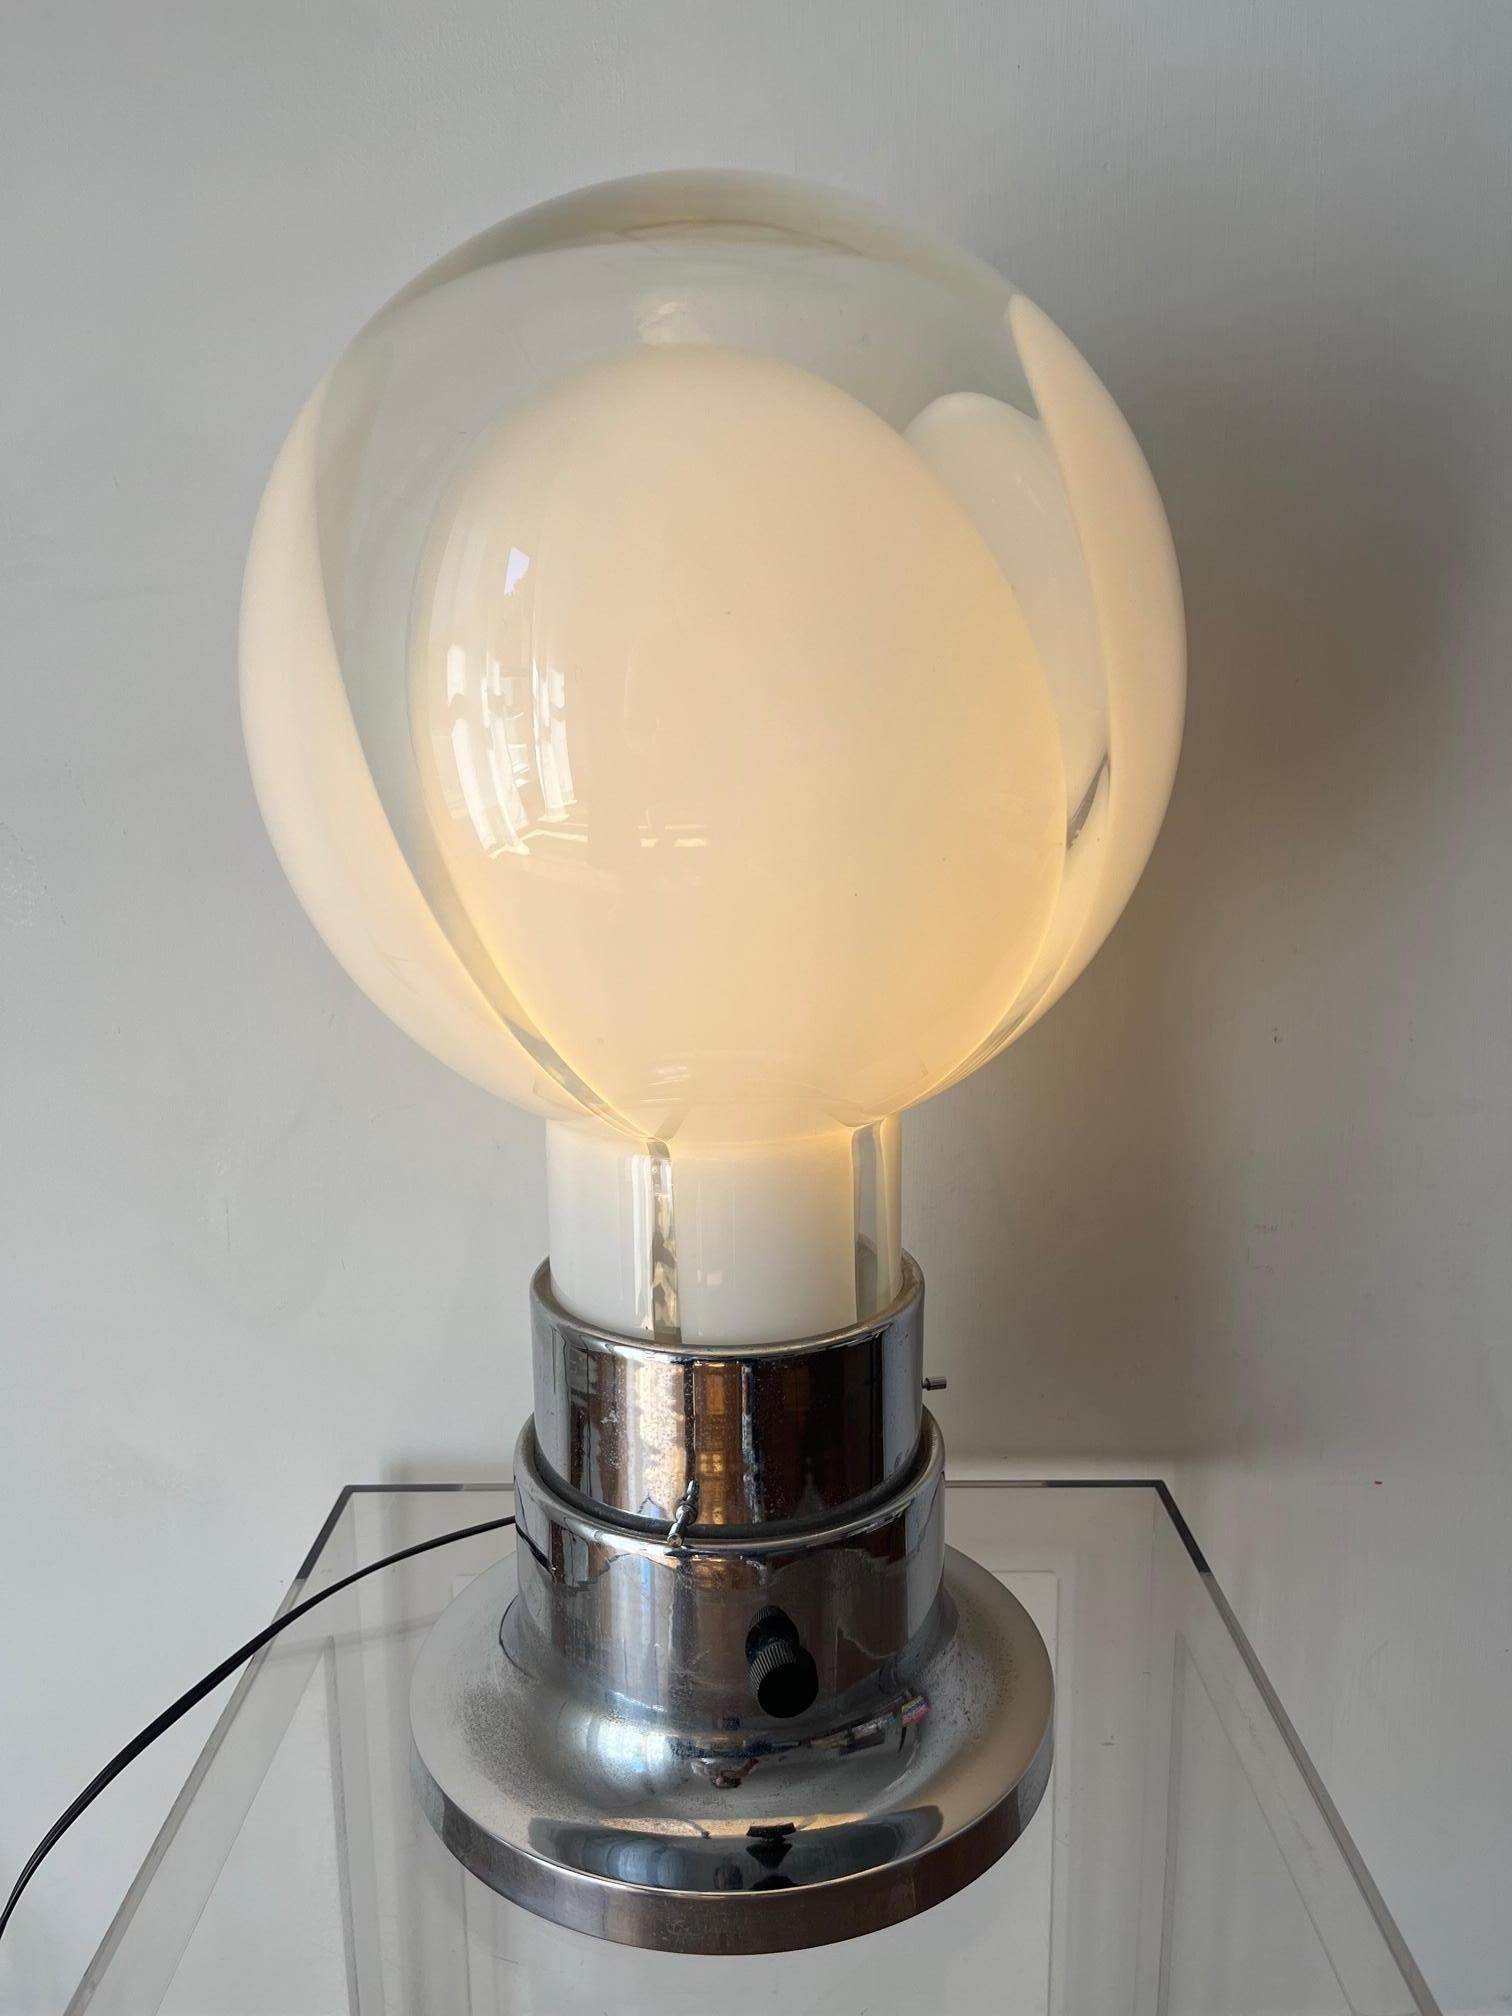 Murano Table Lamp Space Age 1970 -Top Design-

Year: 1970 Space Age 

Color: Transparent, White, Chrome Steel

Materials: Steel, Murano 

Condition: Intact, Functional, Metal with a few dots of oxidation

Measurements: Cm 52 H, Cm 25 D

 

Murano